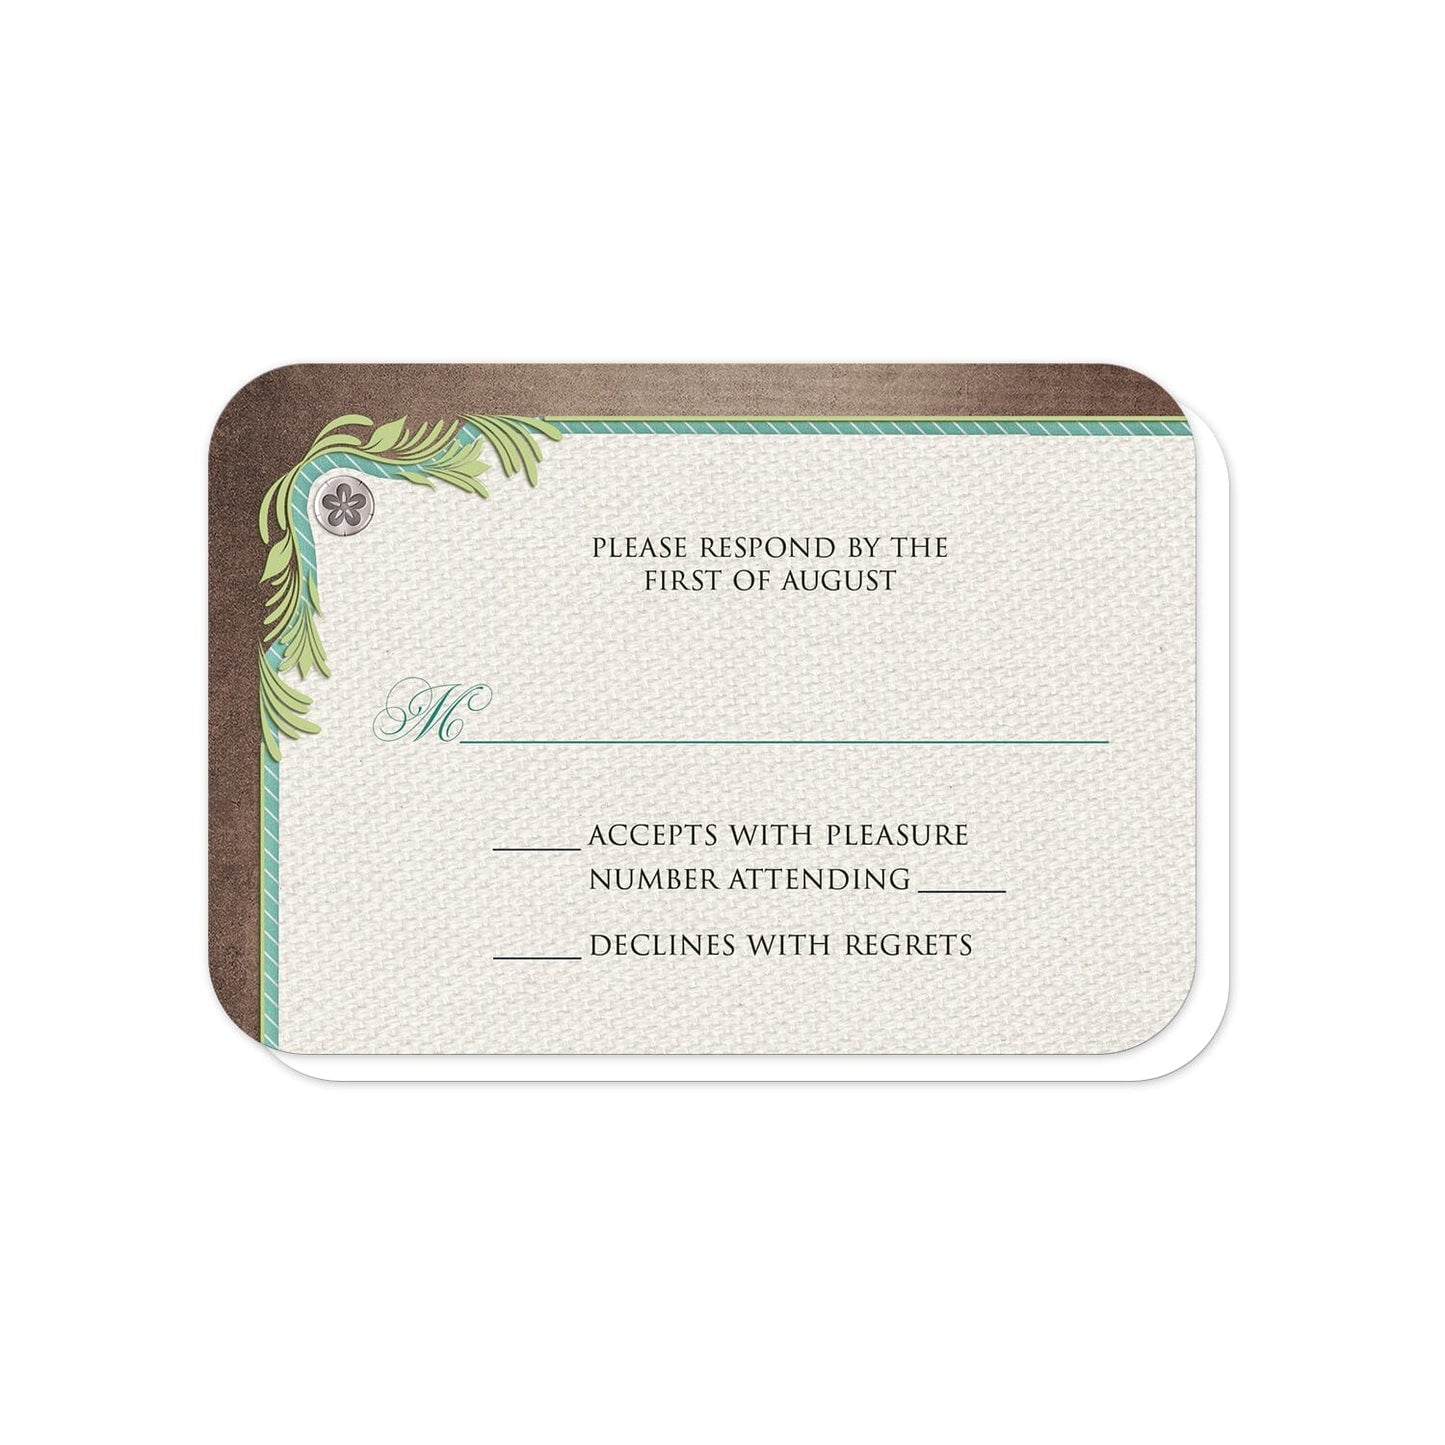 Rustic Succulent Garden RSVP Cards (with rounded corners) at Artistically Invited.